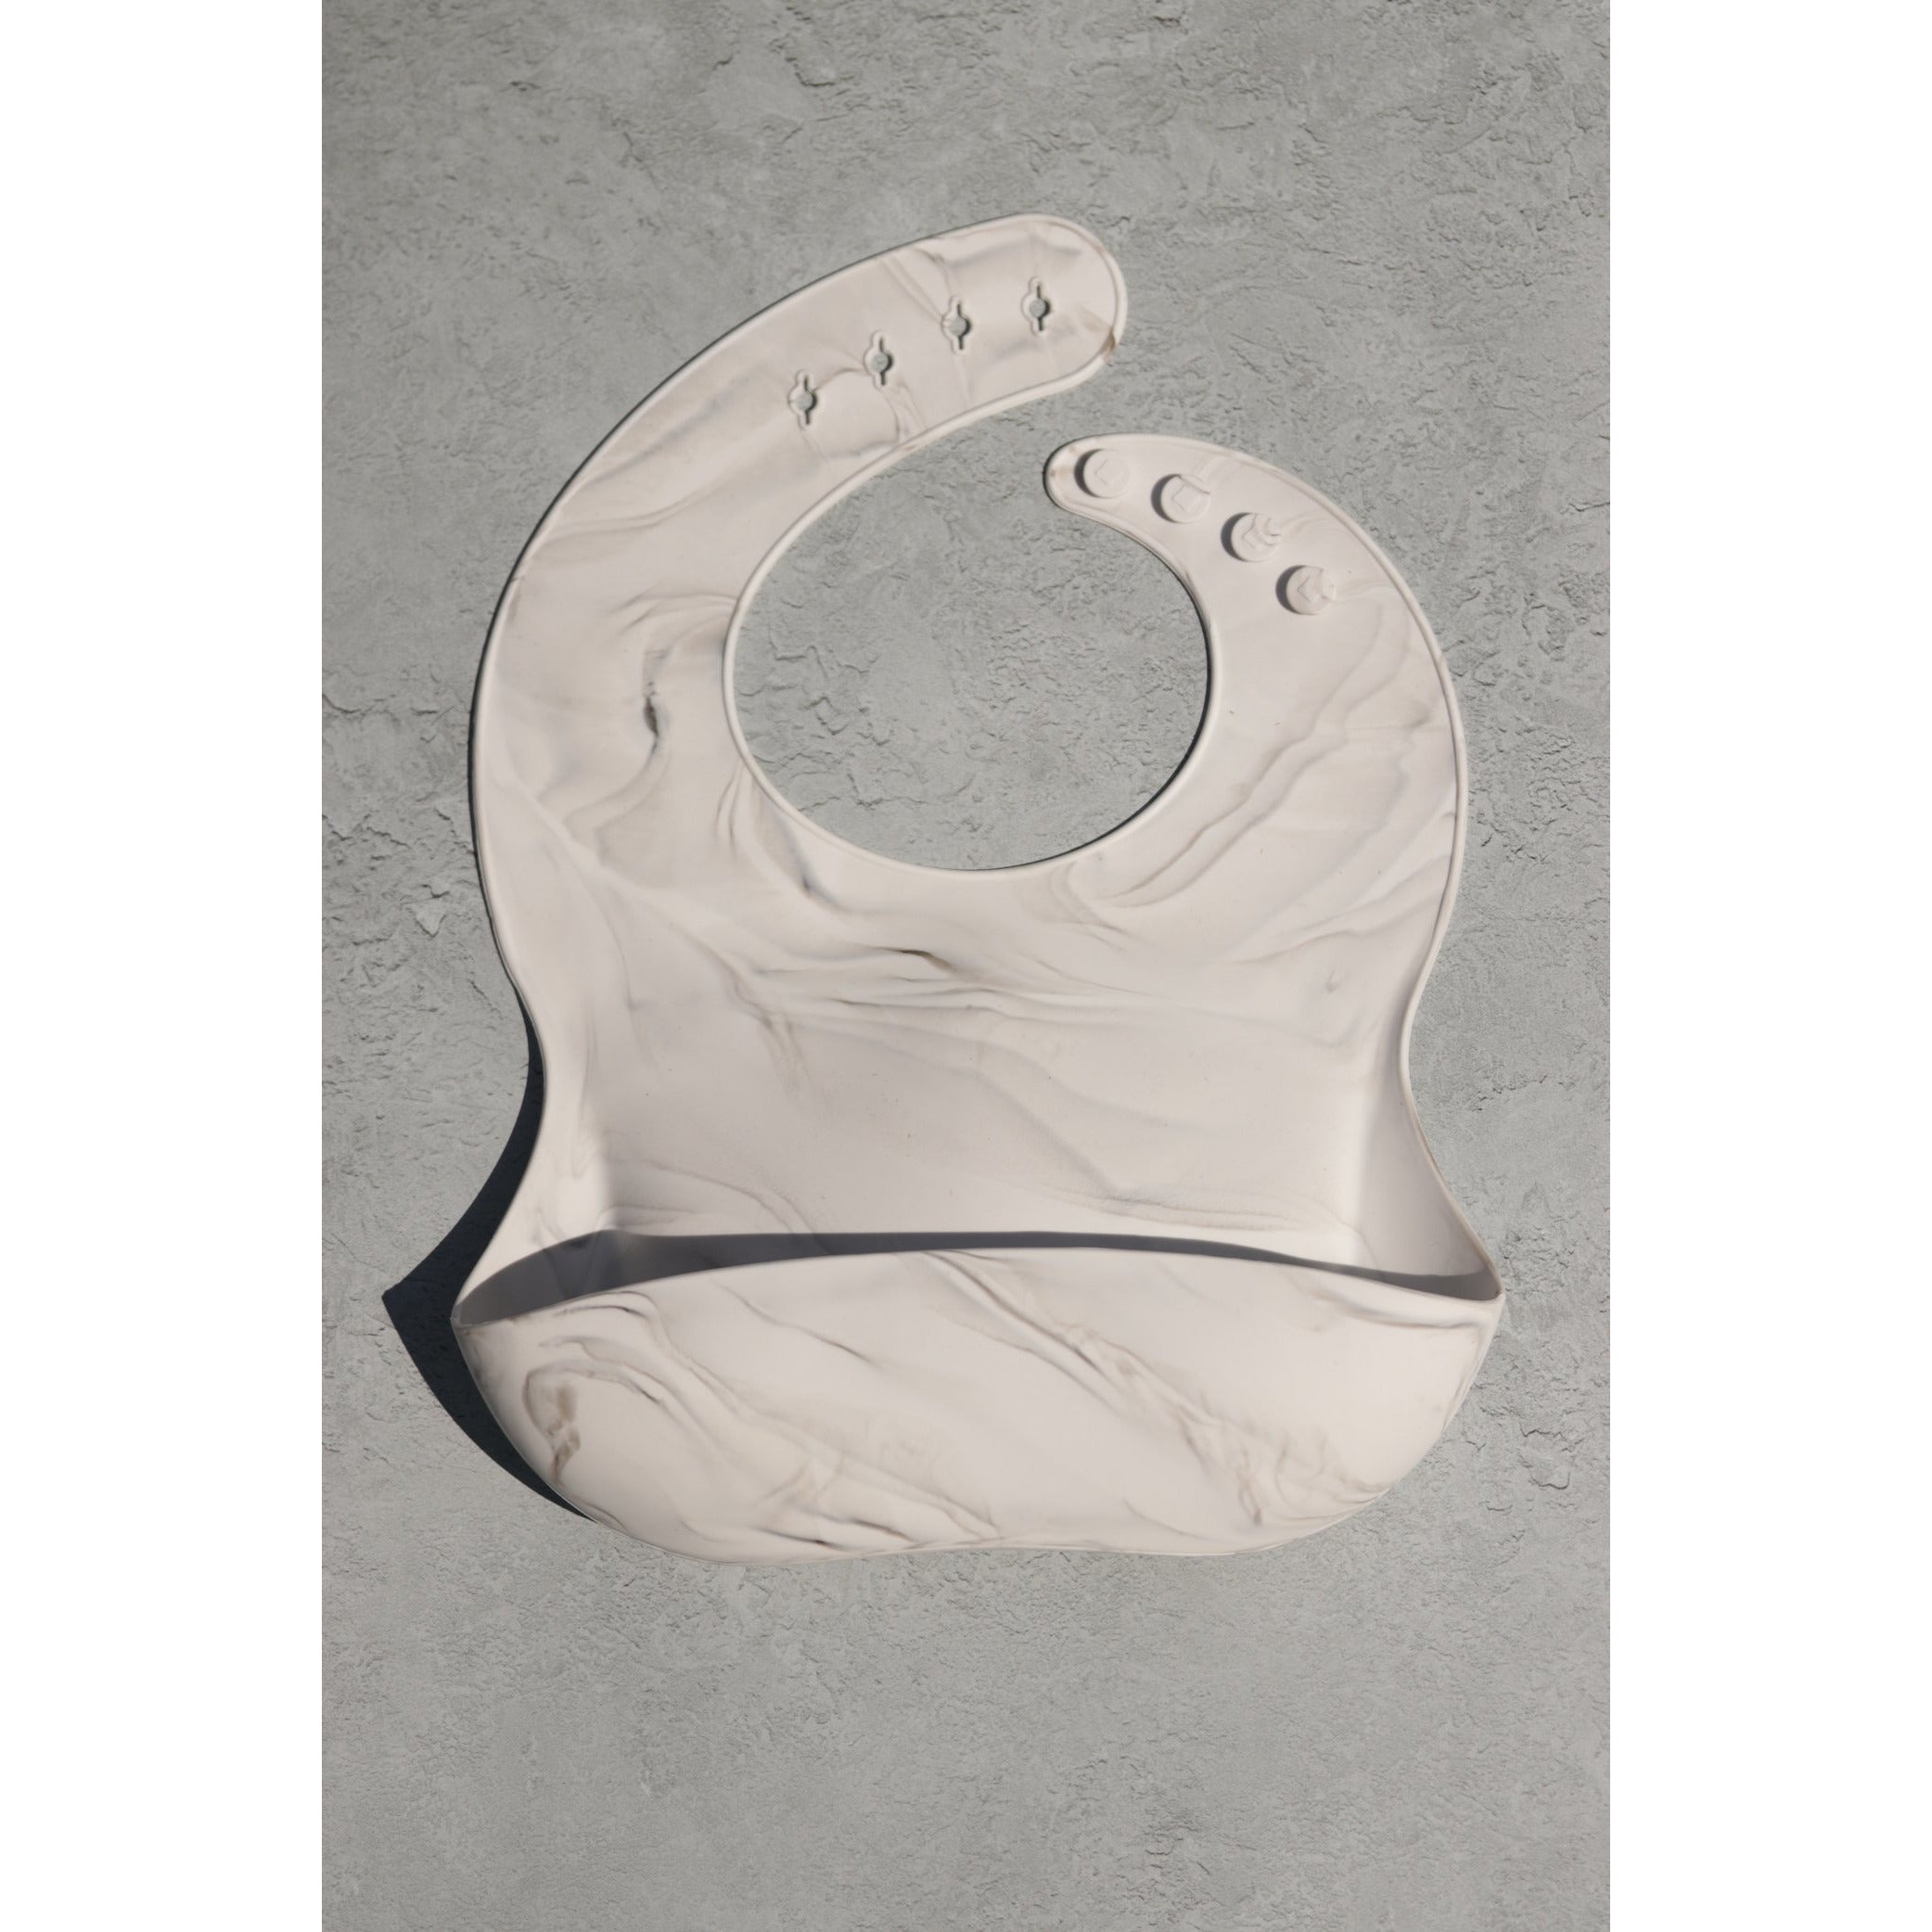 Comfort Bib | Adjustable-Fit | Easy Clean | No-Mess | No-Spill | Deep Catch (White Marble)